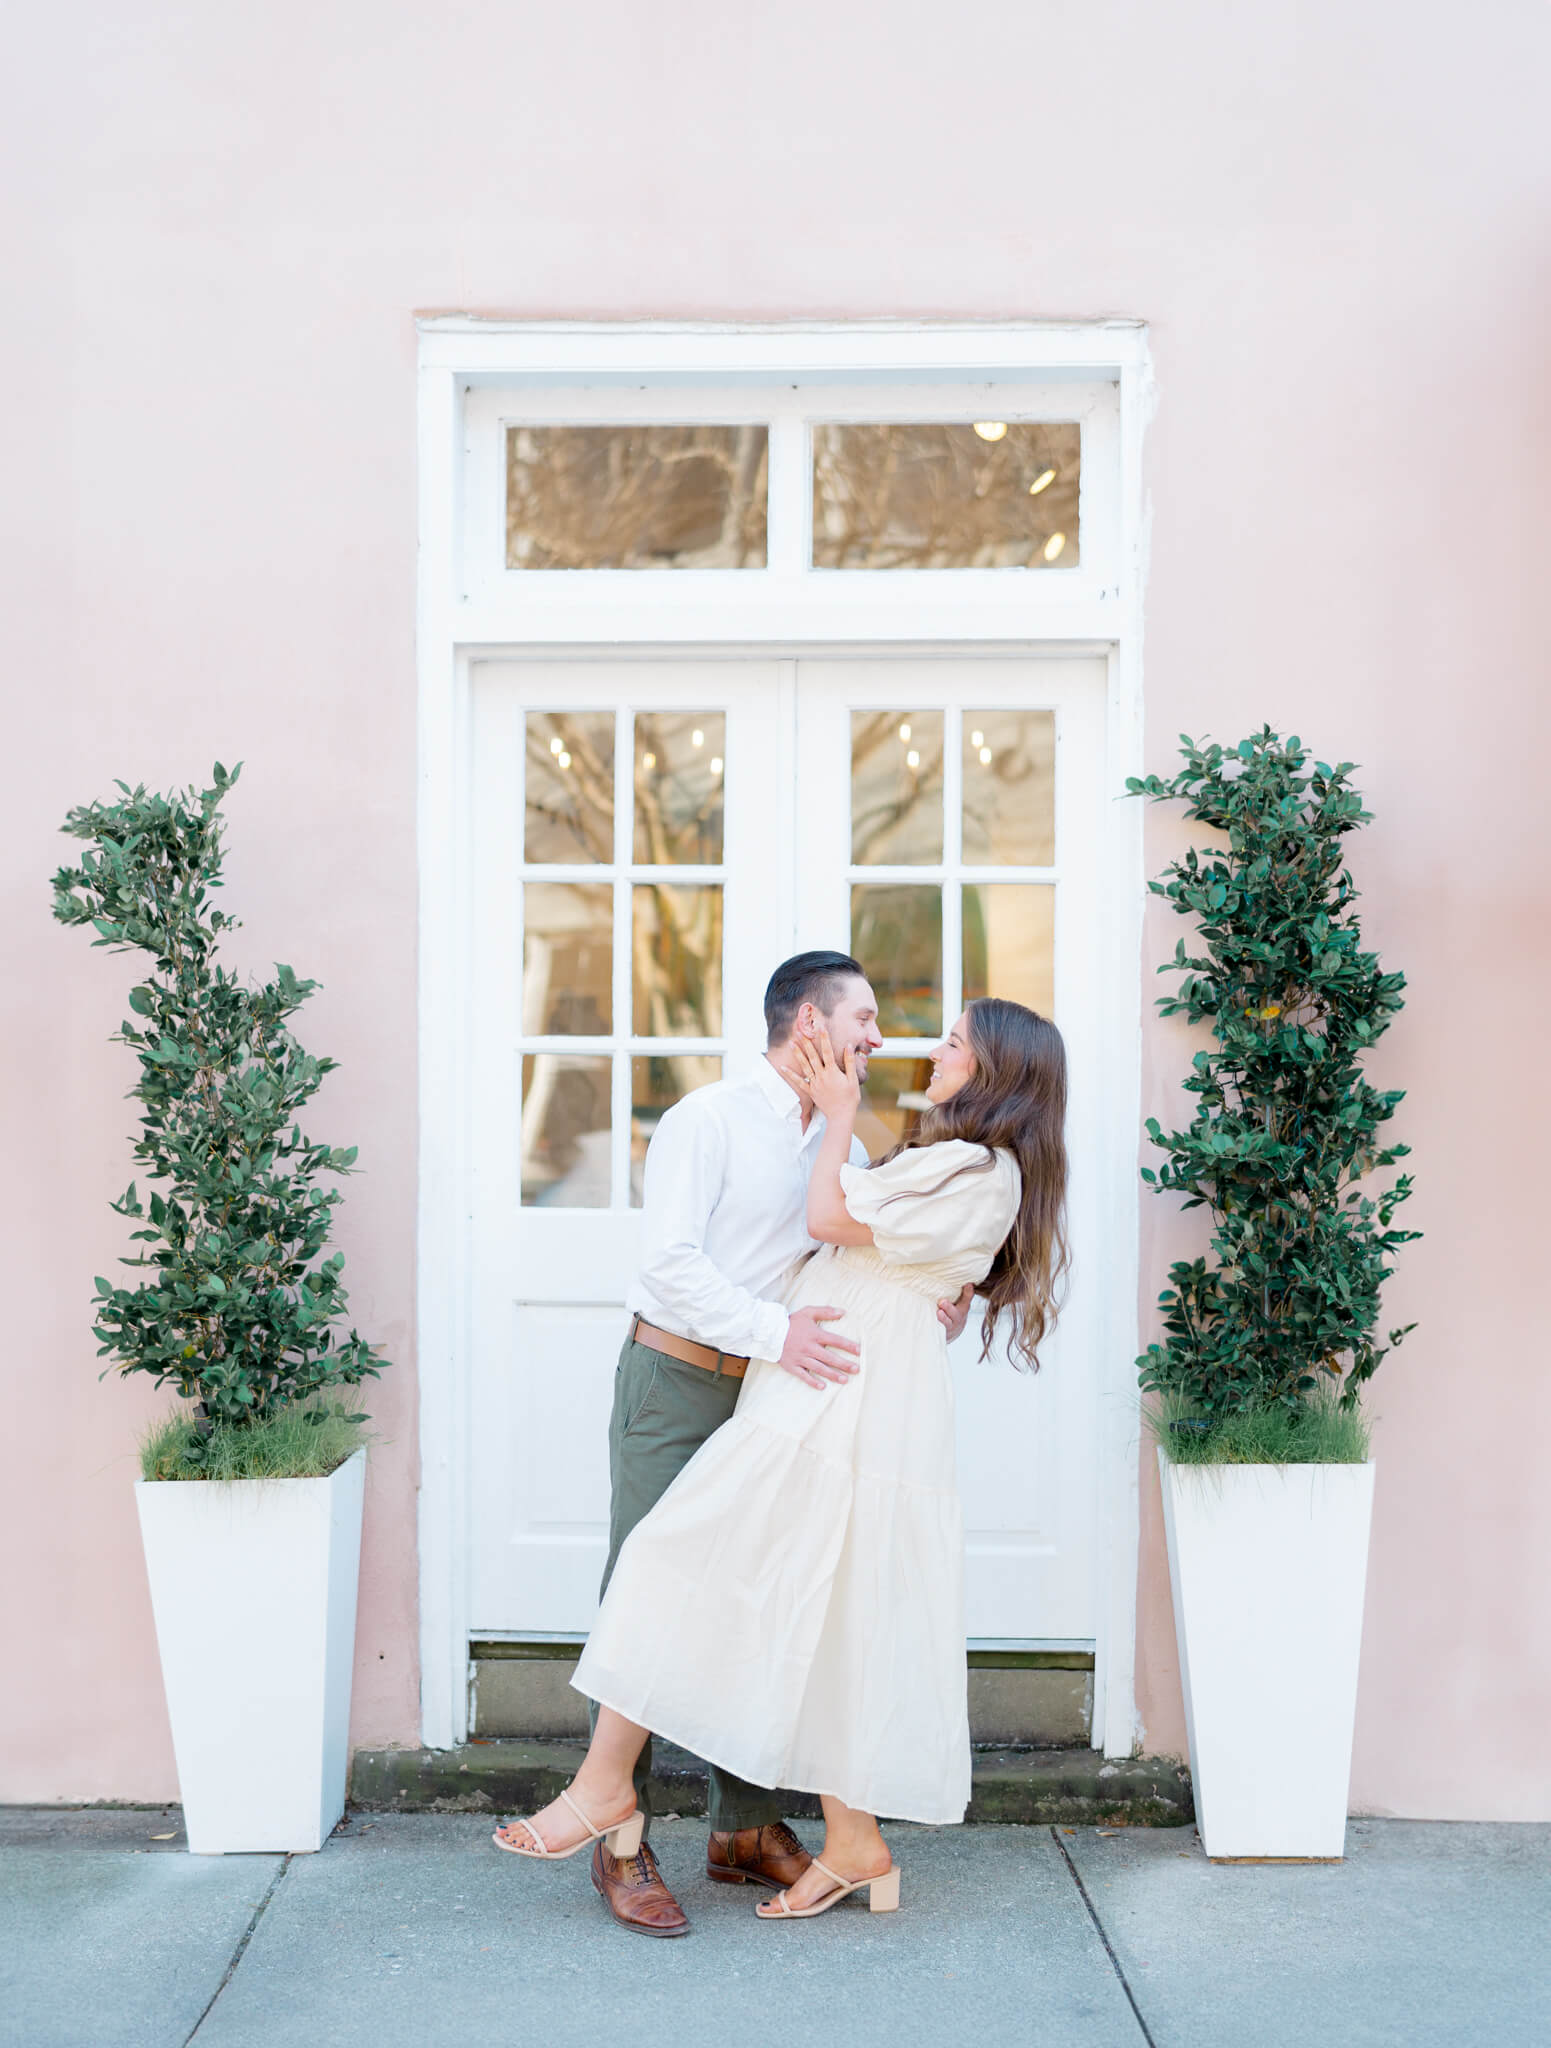 A man dipping a woman back to kiss her in front of a white door and pink building with two shrubs.